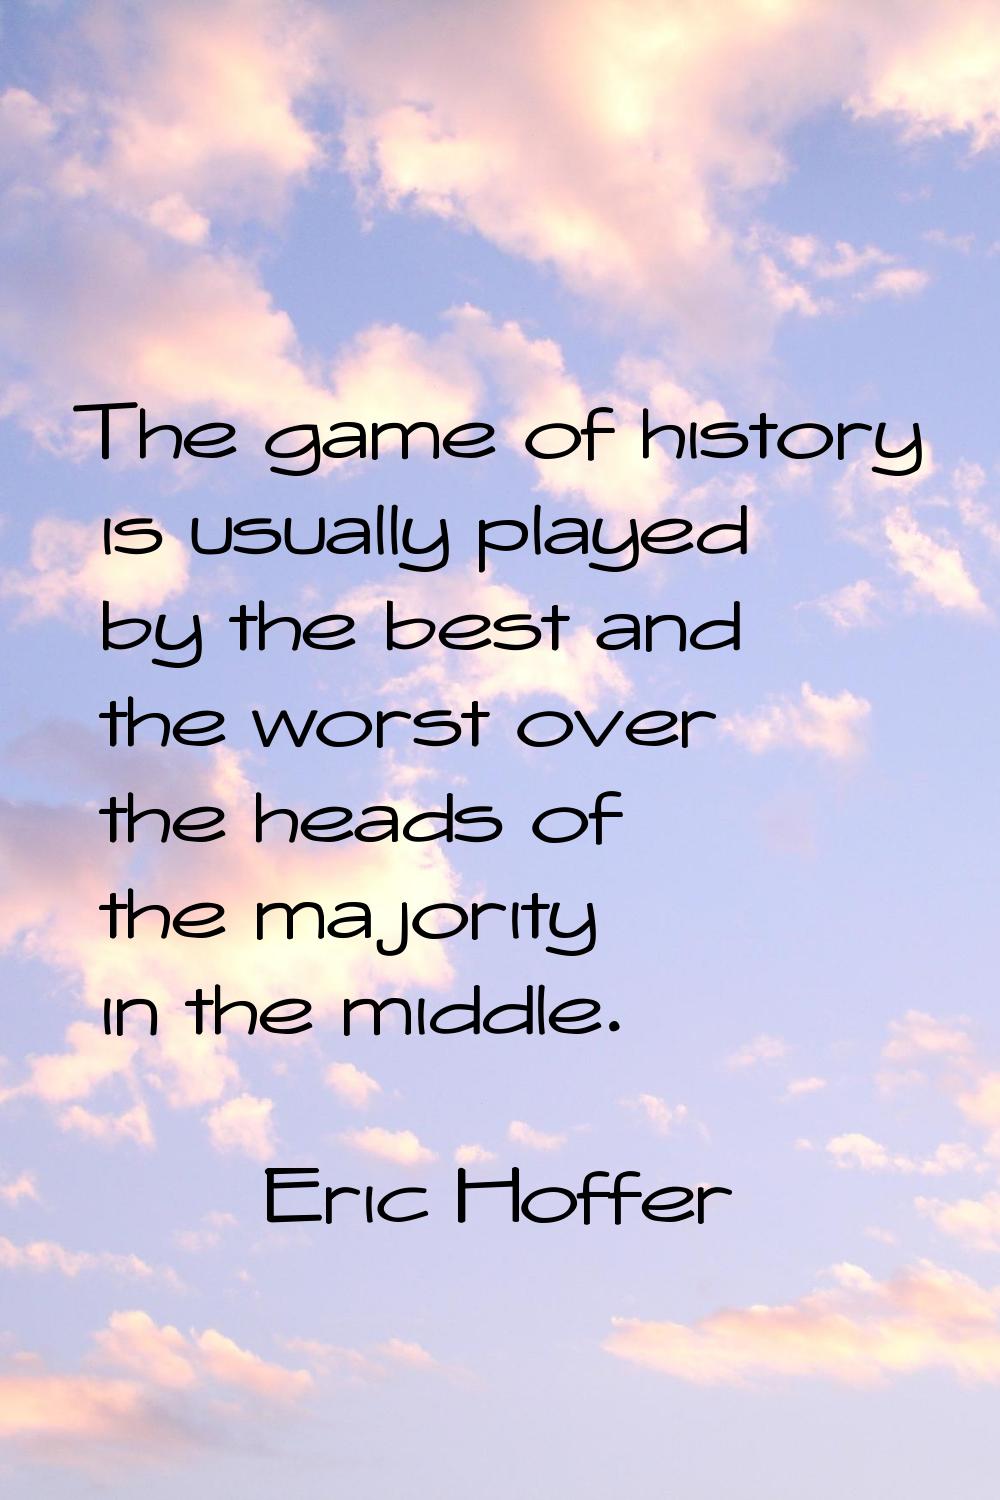 The game of history is usually played by the best and the worst over the heads of the majority in t